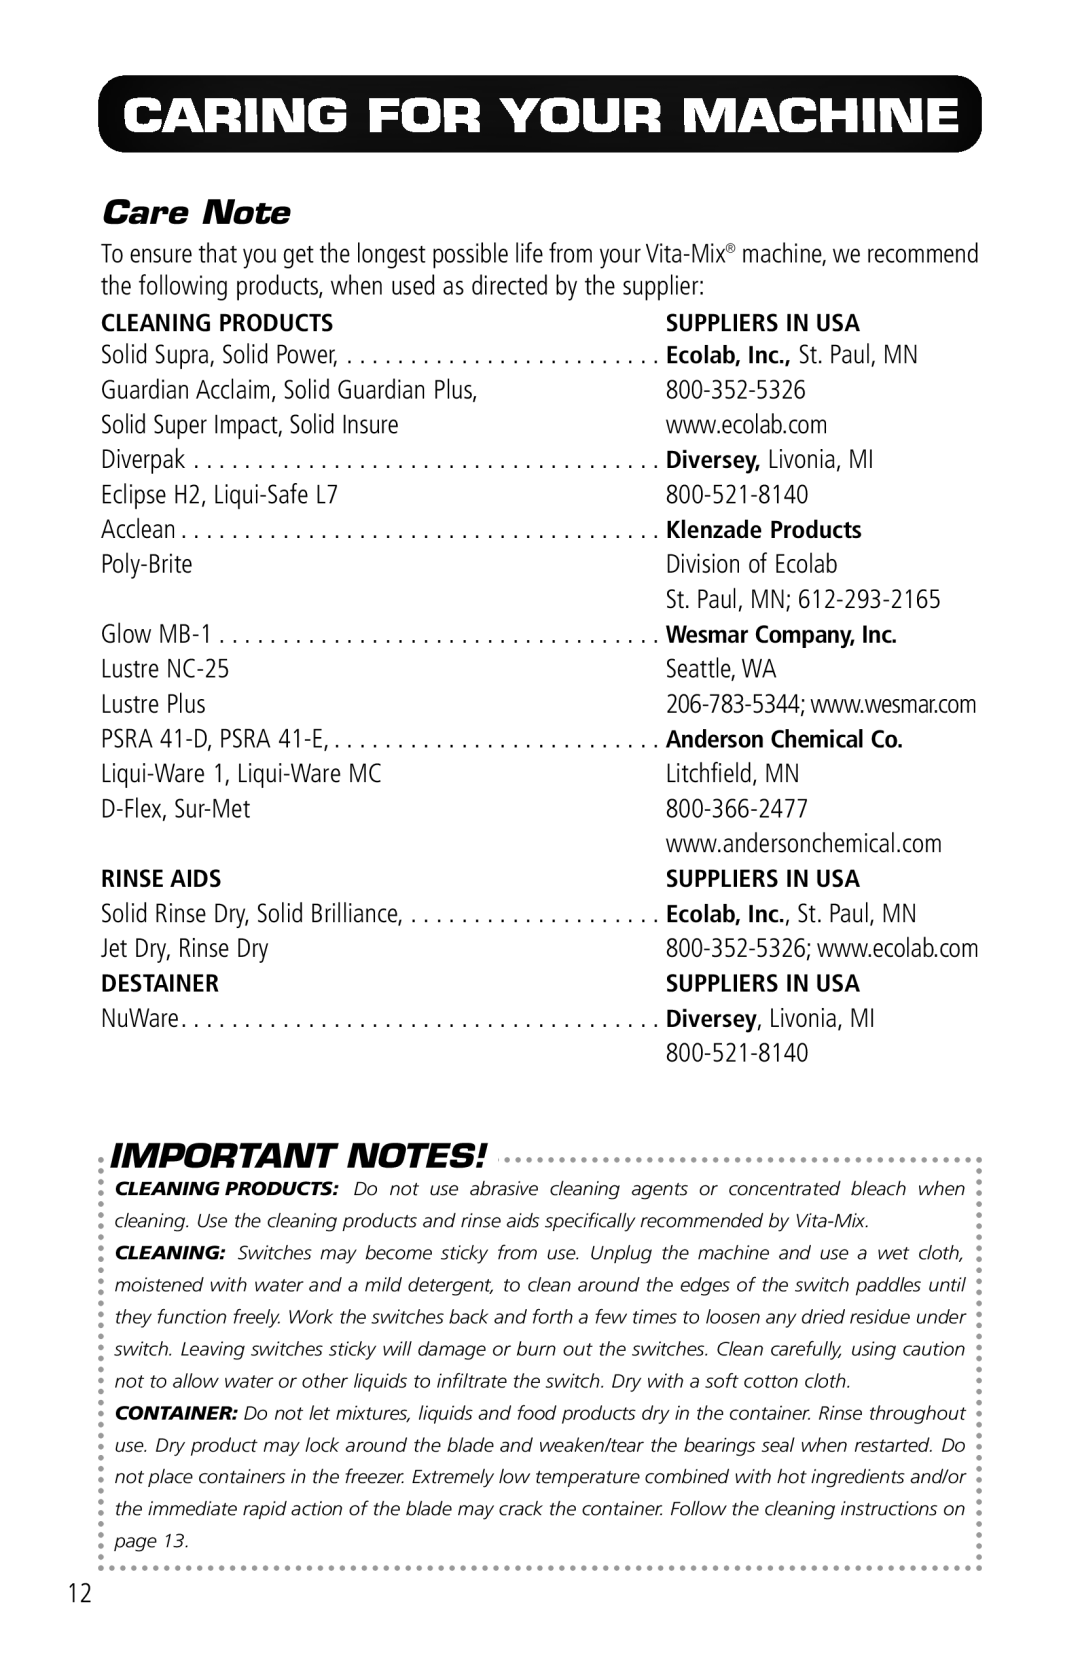 Vita-Mix VM0141 manual Caring For Your Machine, Care Note, Important Notes 